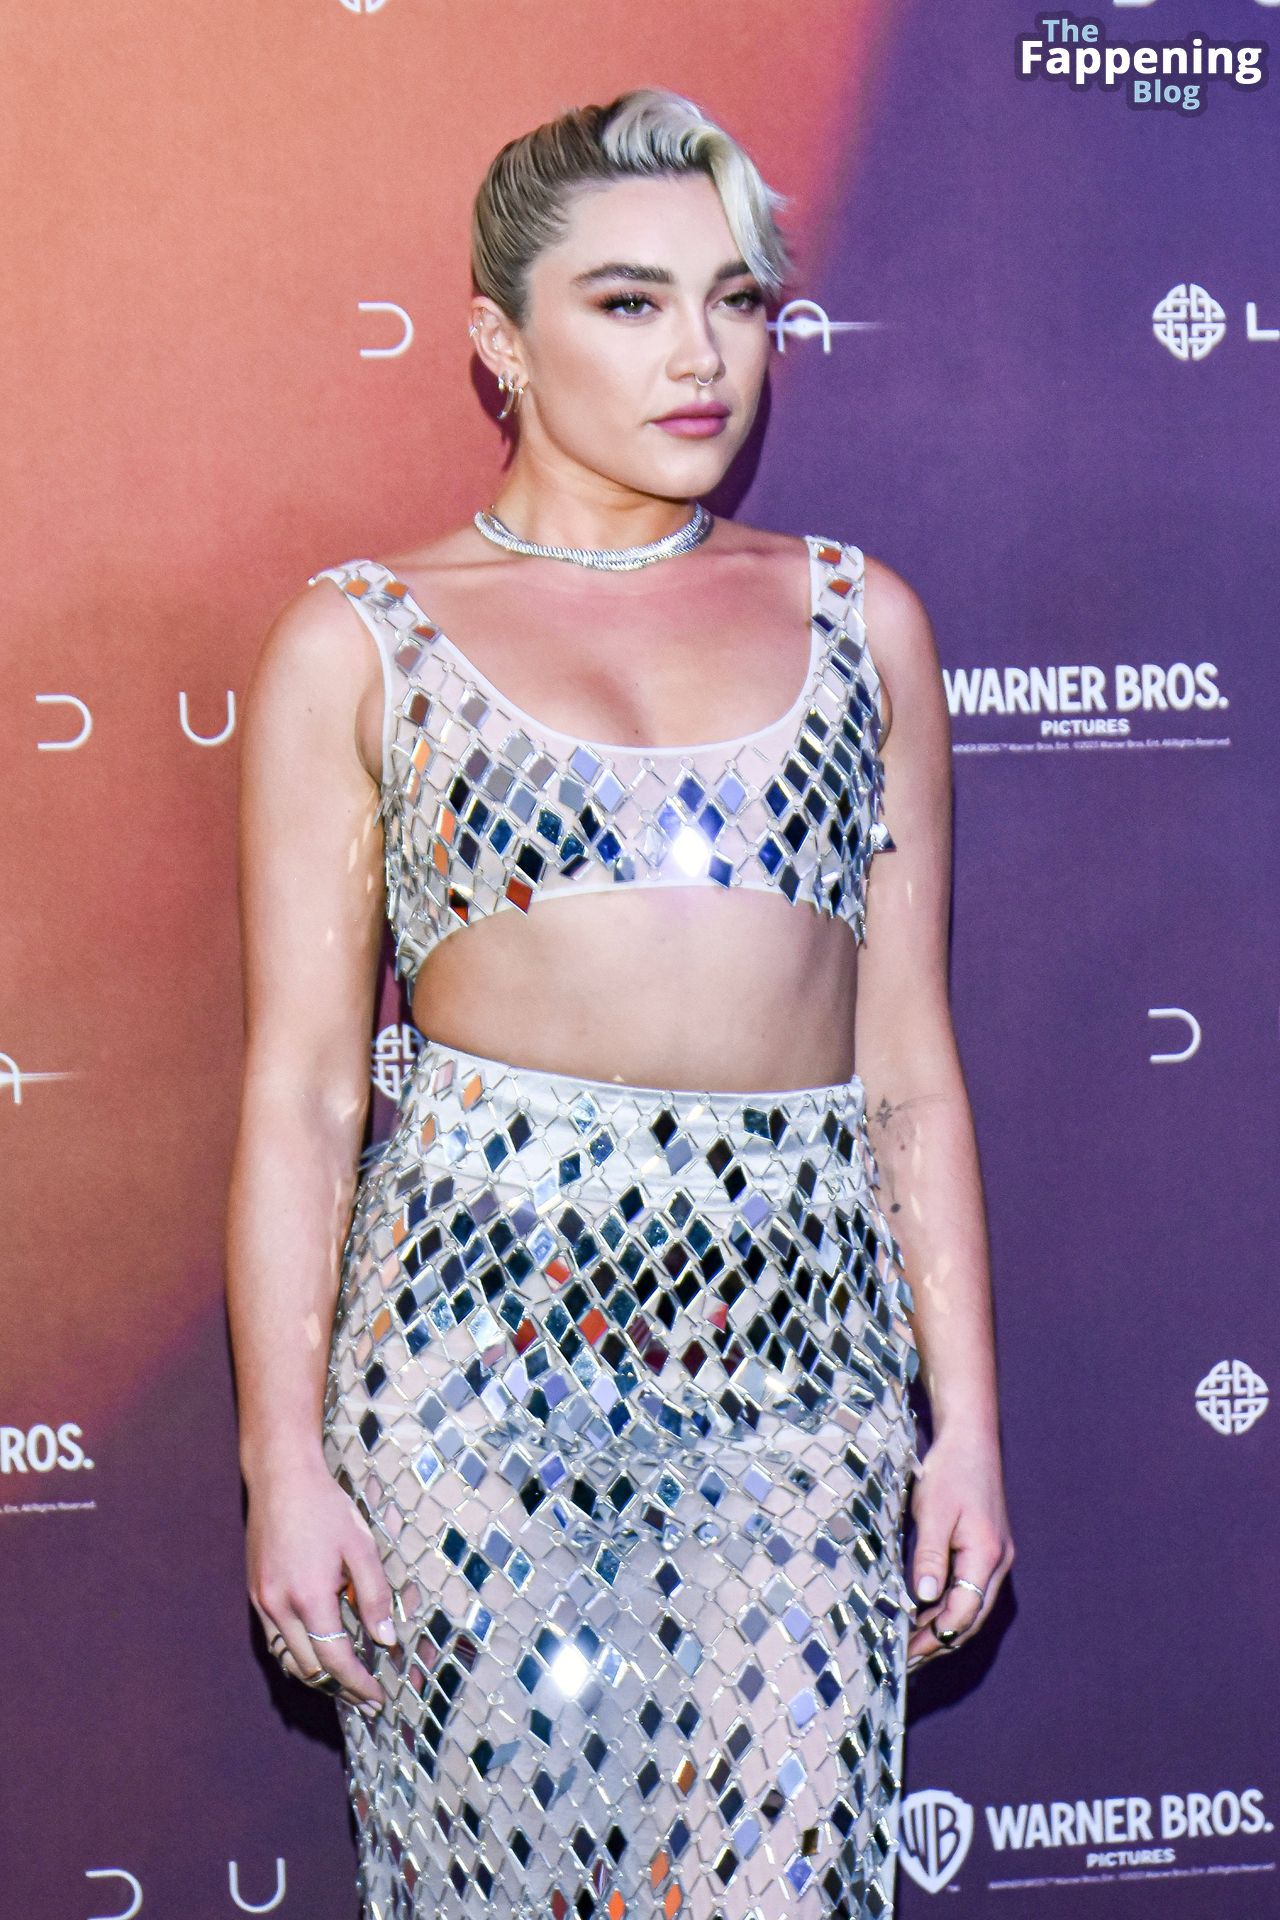 Florence-Pugh-Sexy-47-The-Fappening-Blog.jpg